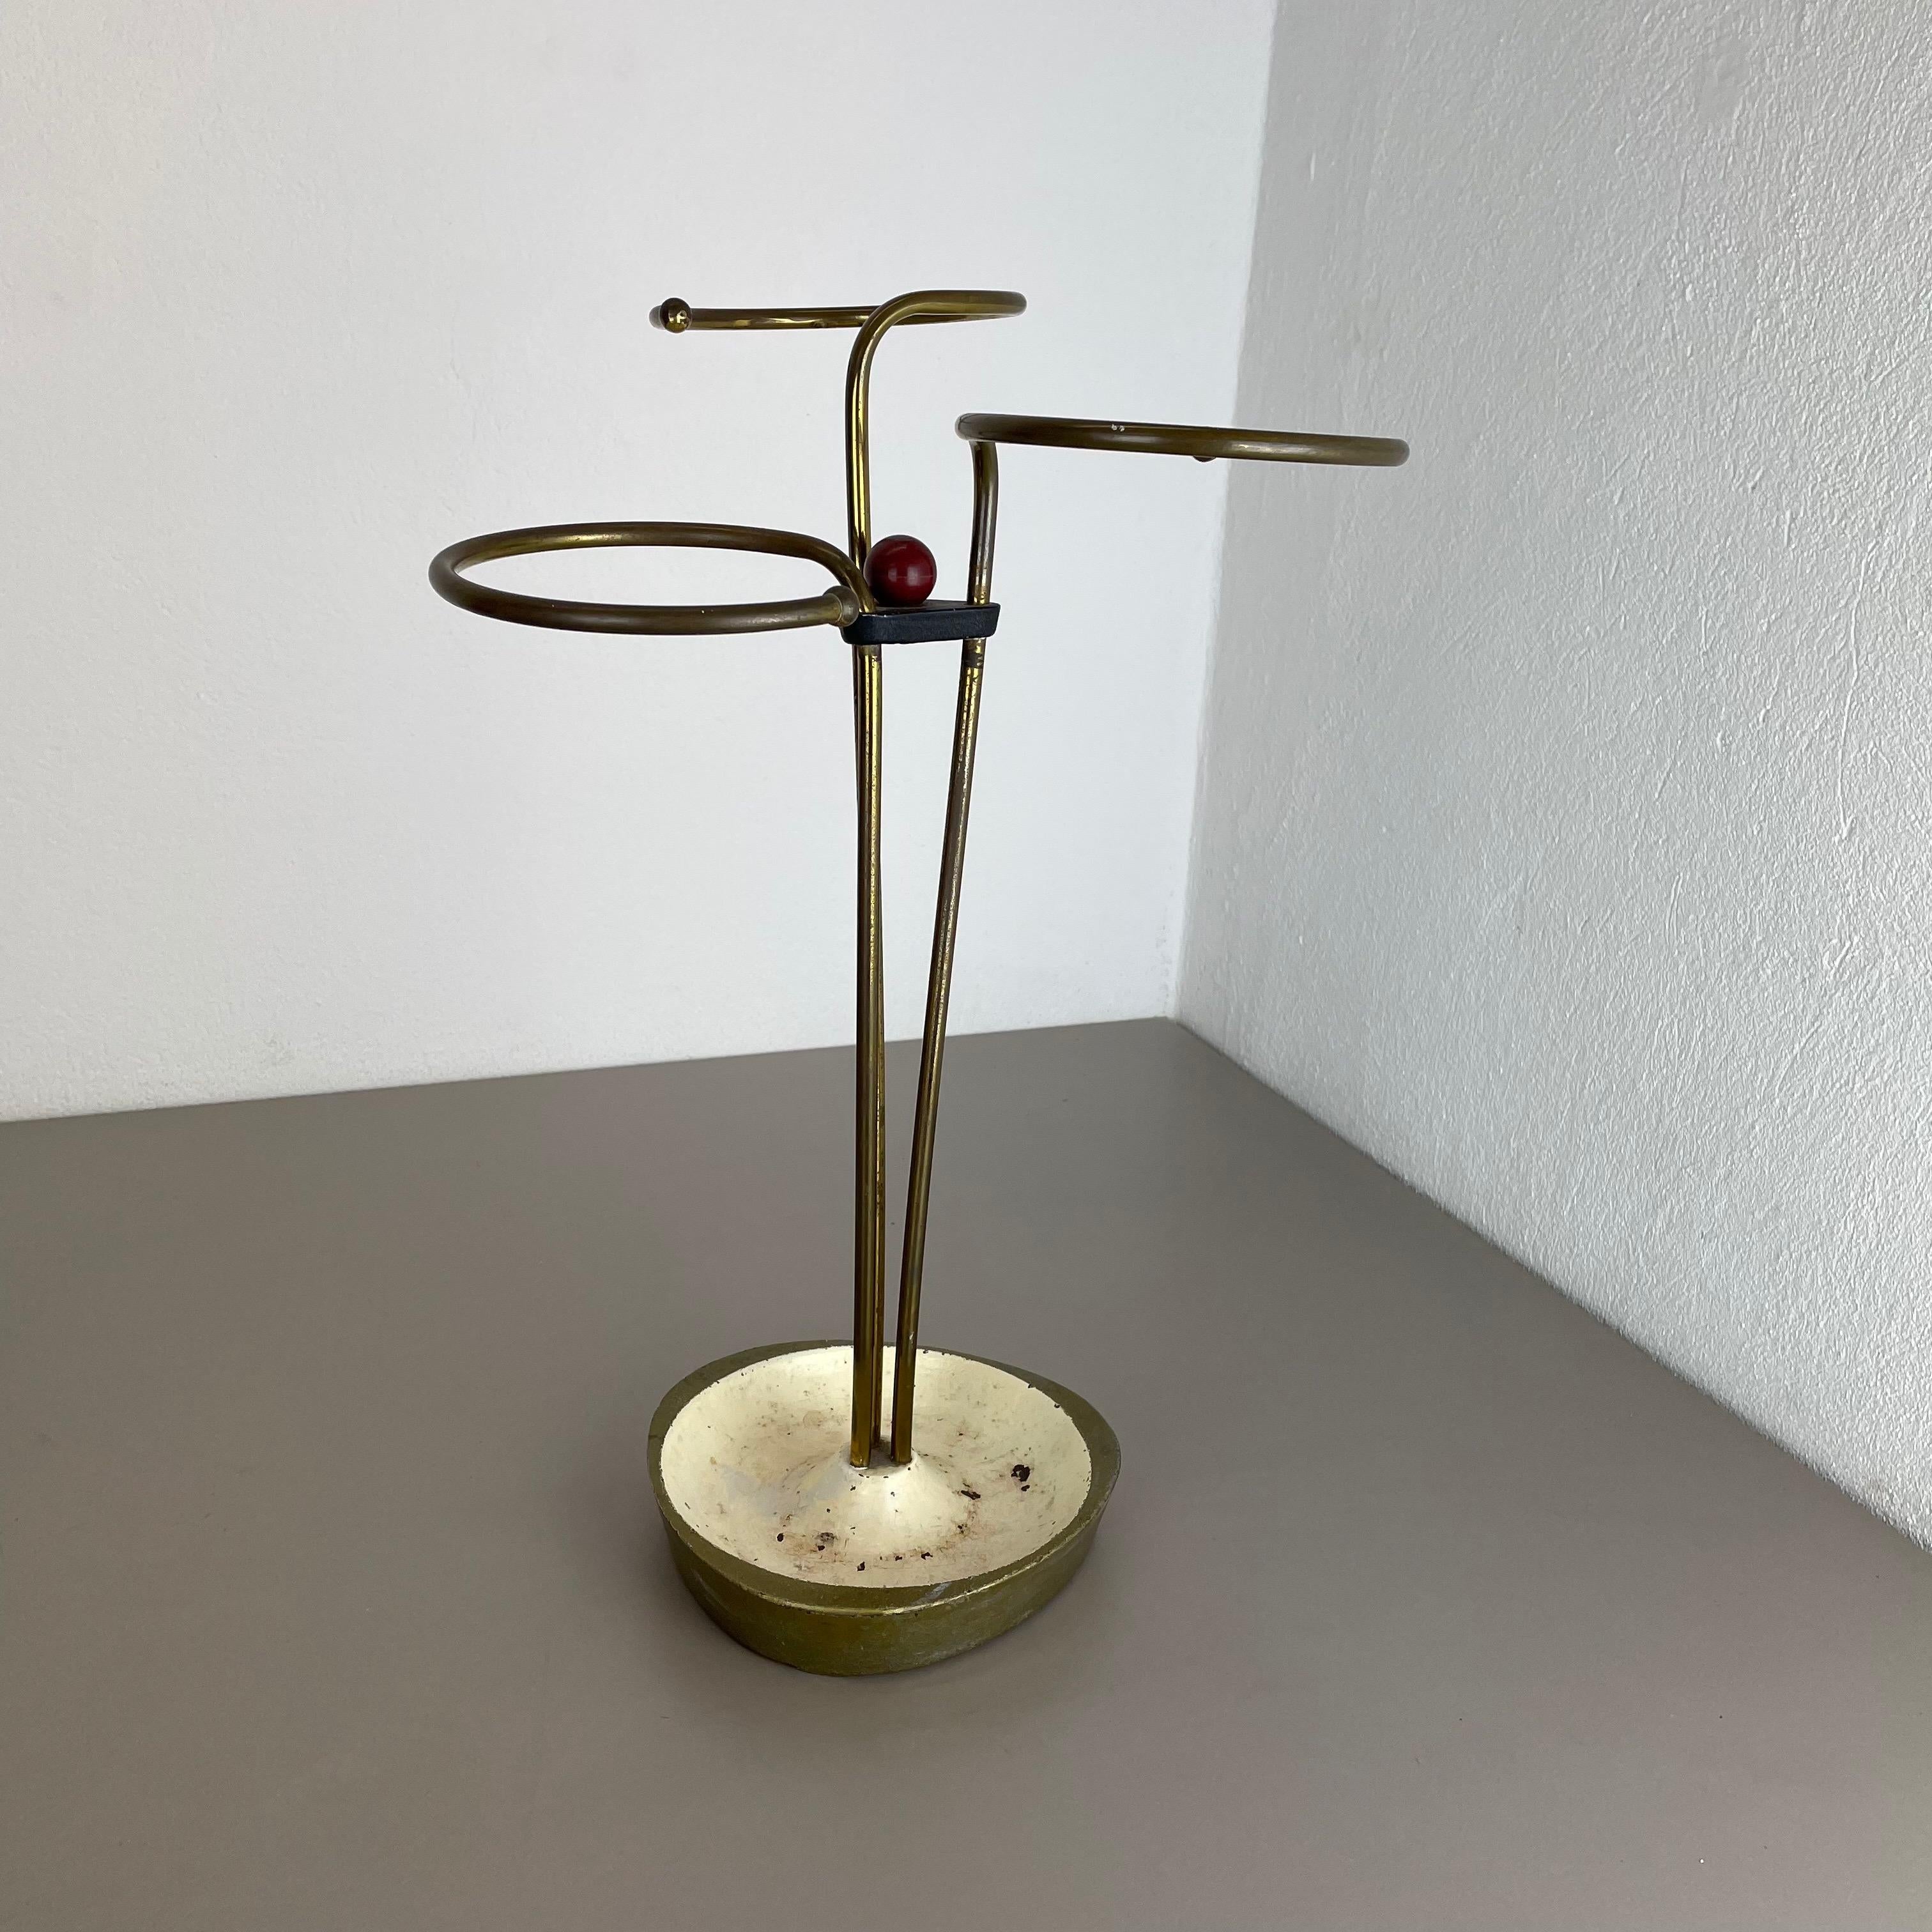 Article:

Bauhaus umbrella stand


Origin:

Germany


Age:

1950s


This original vintage Bauhaus style umbrella stand was produced in the 1950s in Germany. The umbrella holding element on the top are made of solid brass in a nice